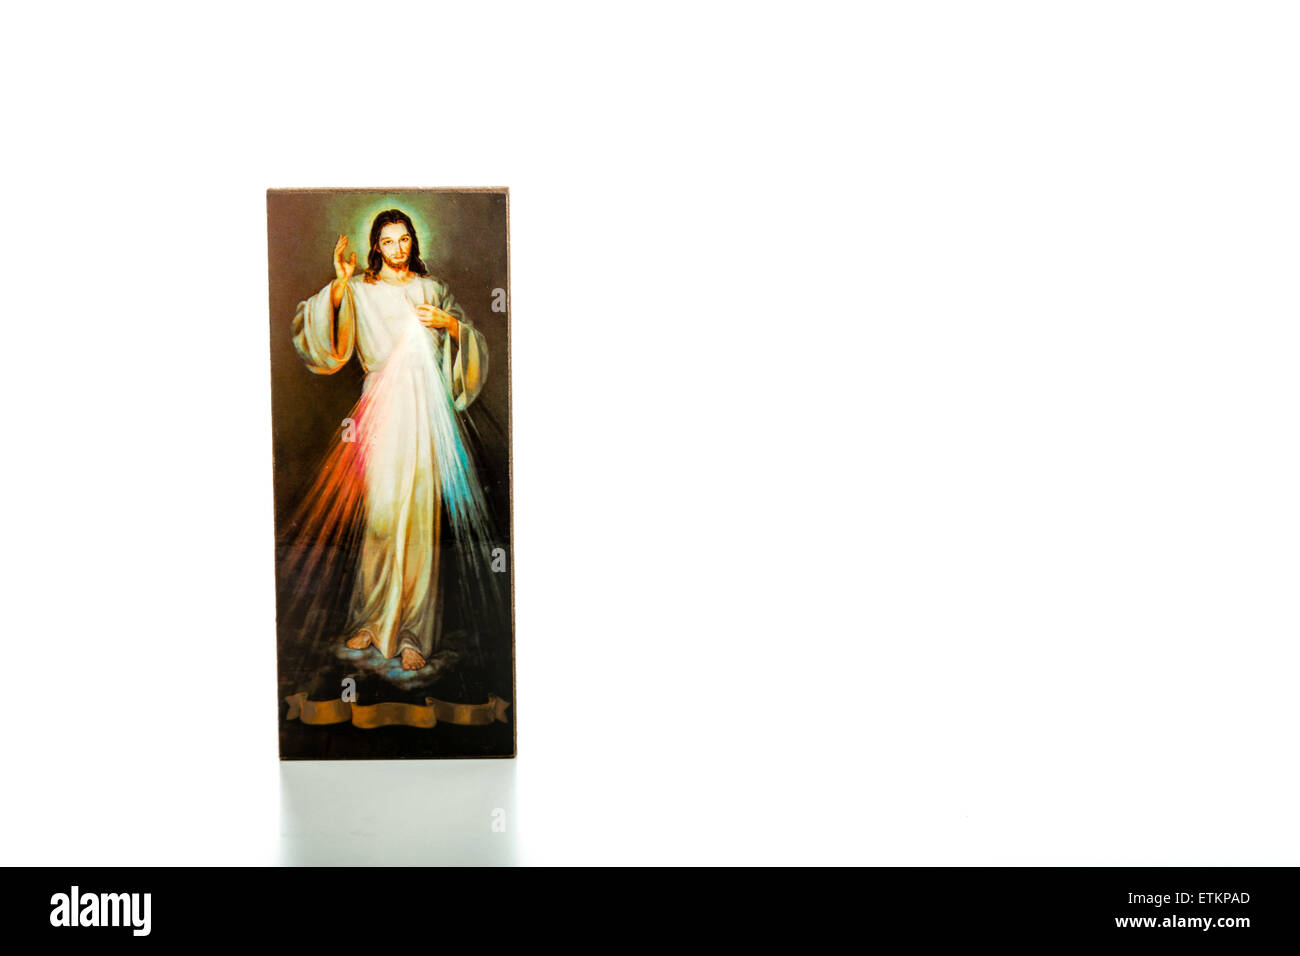 Isolated on white background, an image of the Merciful Jesus with blank ribbon at the bottom without writings Stock Photo